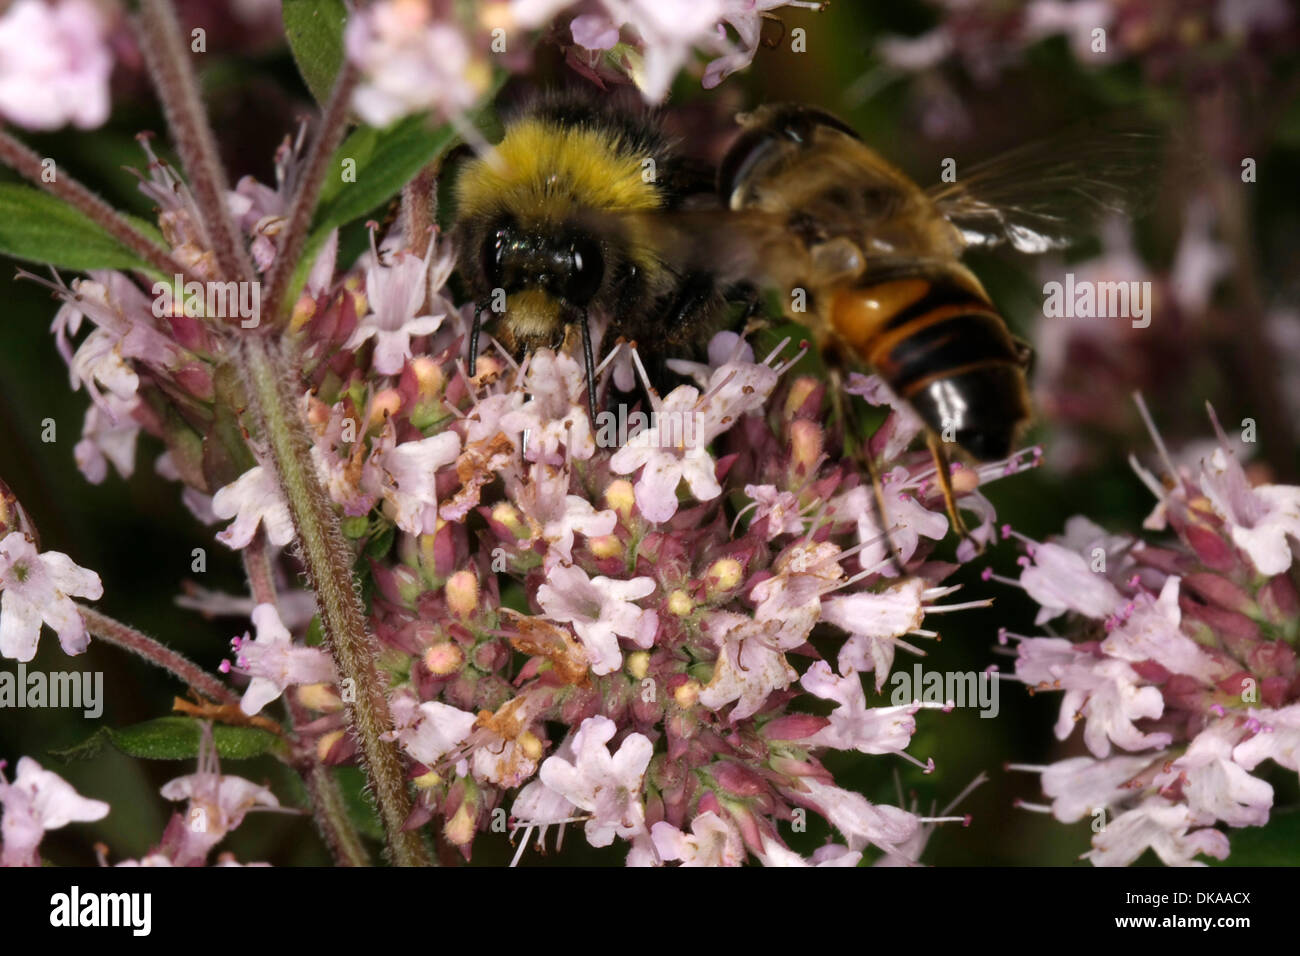 Nectar collecting bumble bee on oregano flowers. The oregano is an agreeable aromatically smelling plant, whose ethereal oils are used for medicines. It also finds very application in the herb-kitchen. Photo: Klaus Nowottnick Date: August 1, 2013 Stock Photo